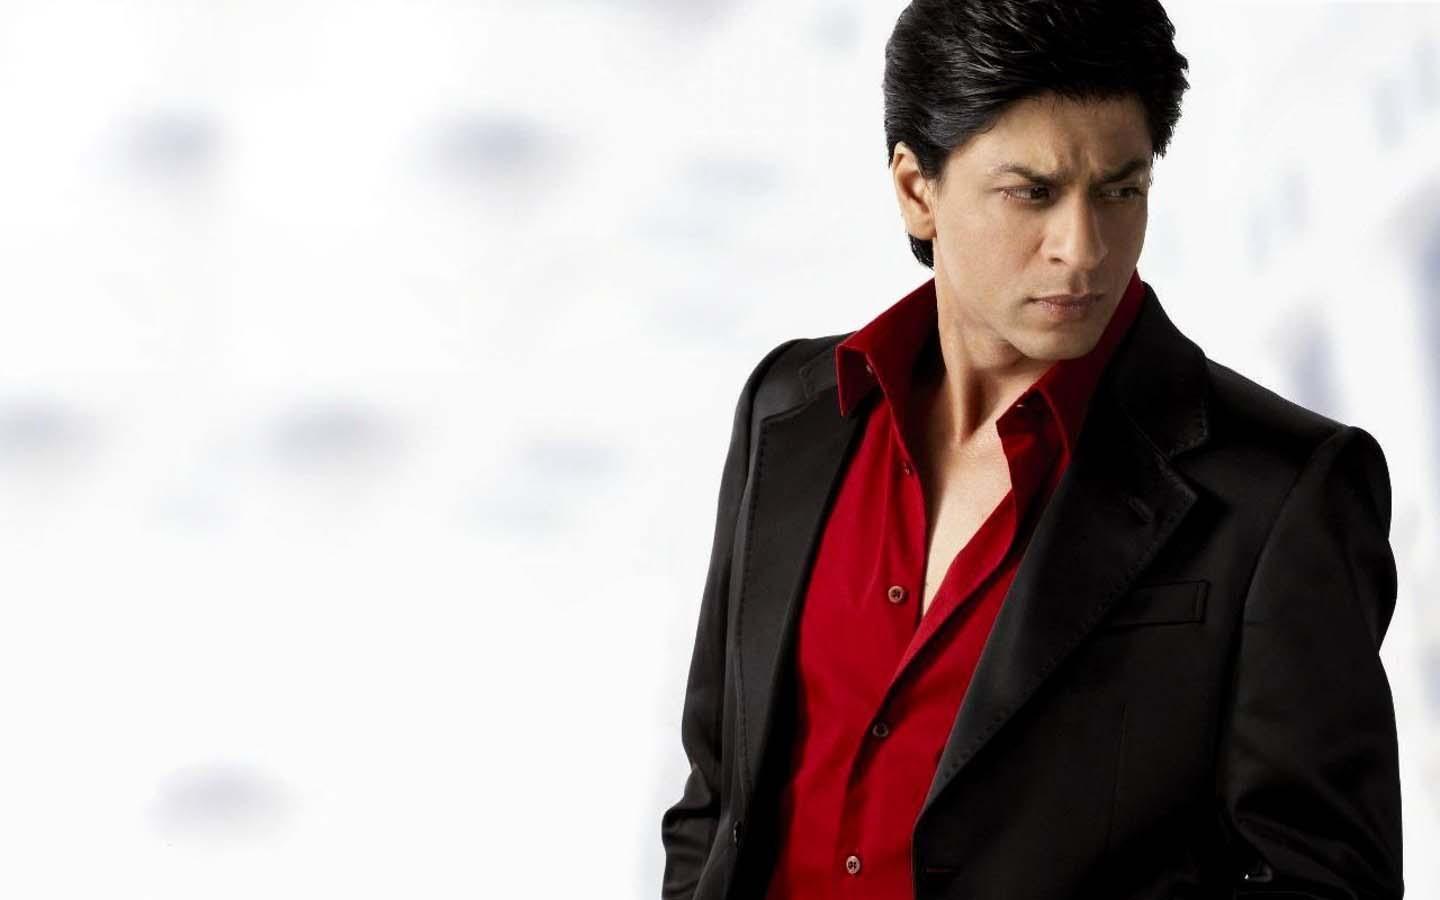 Shahrukh Khan HD Wallpapers | Latest Shahrukh Khan Wallpapers HD Free  Download (1080p to 2K) - FilmiBeat